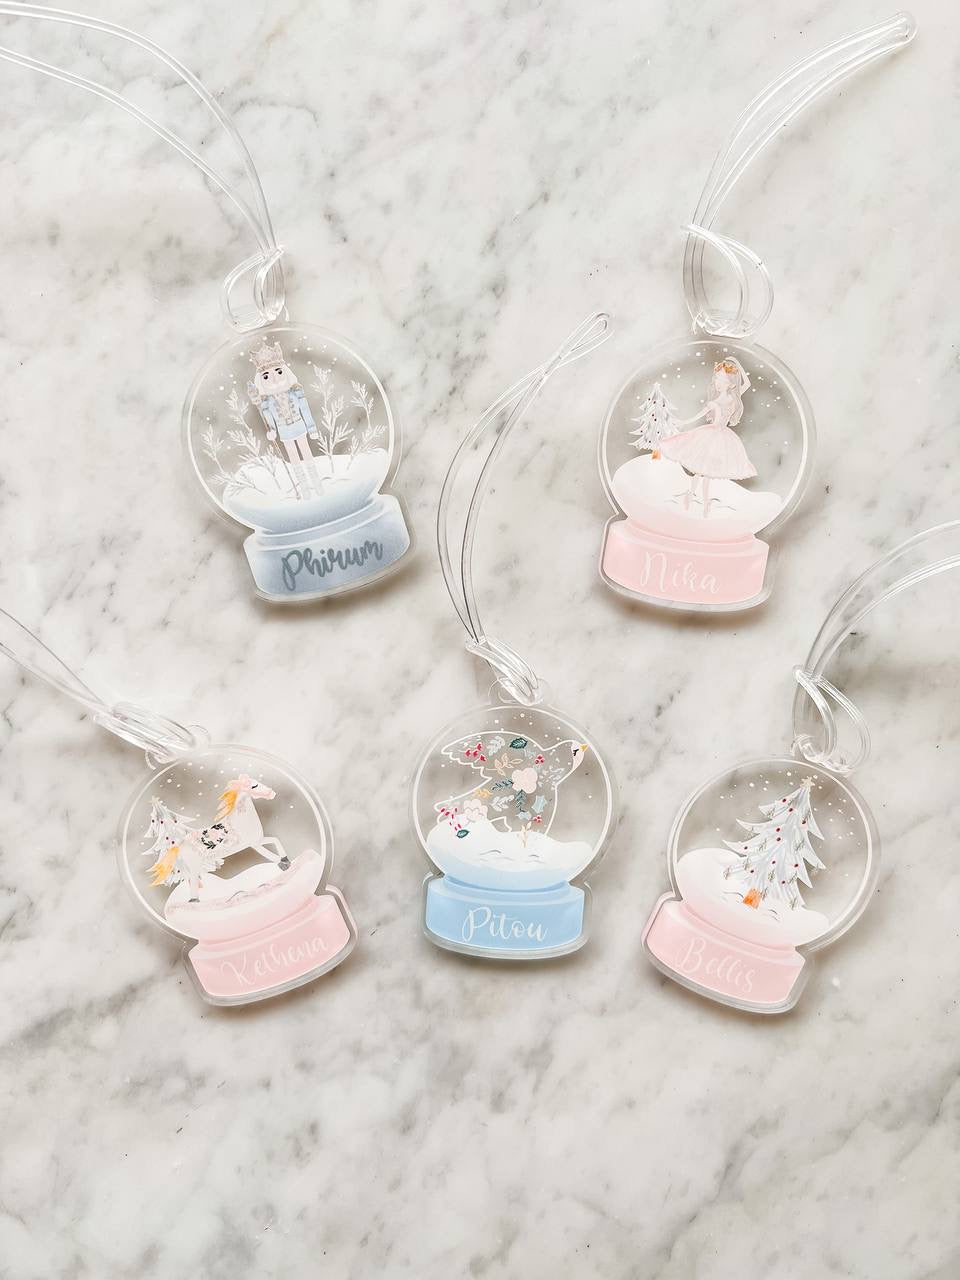 Christmas Personalised Acrylic Ornaments / Bag Tags (Pre-Order)